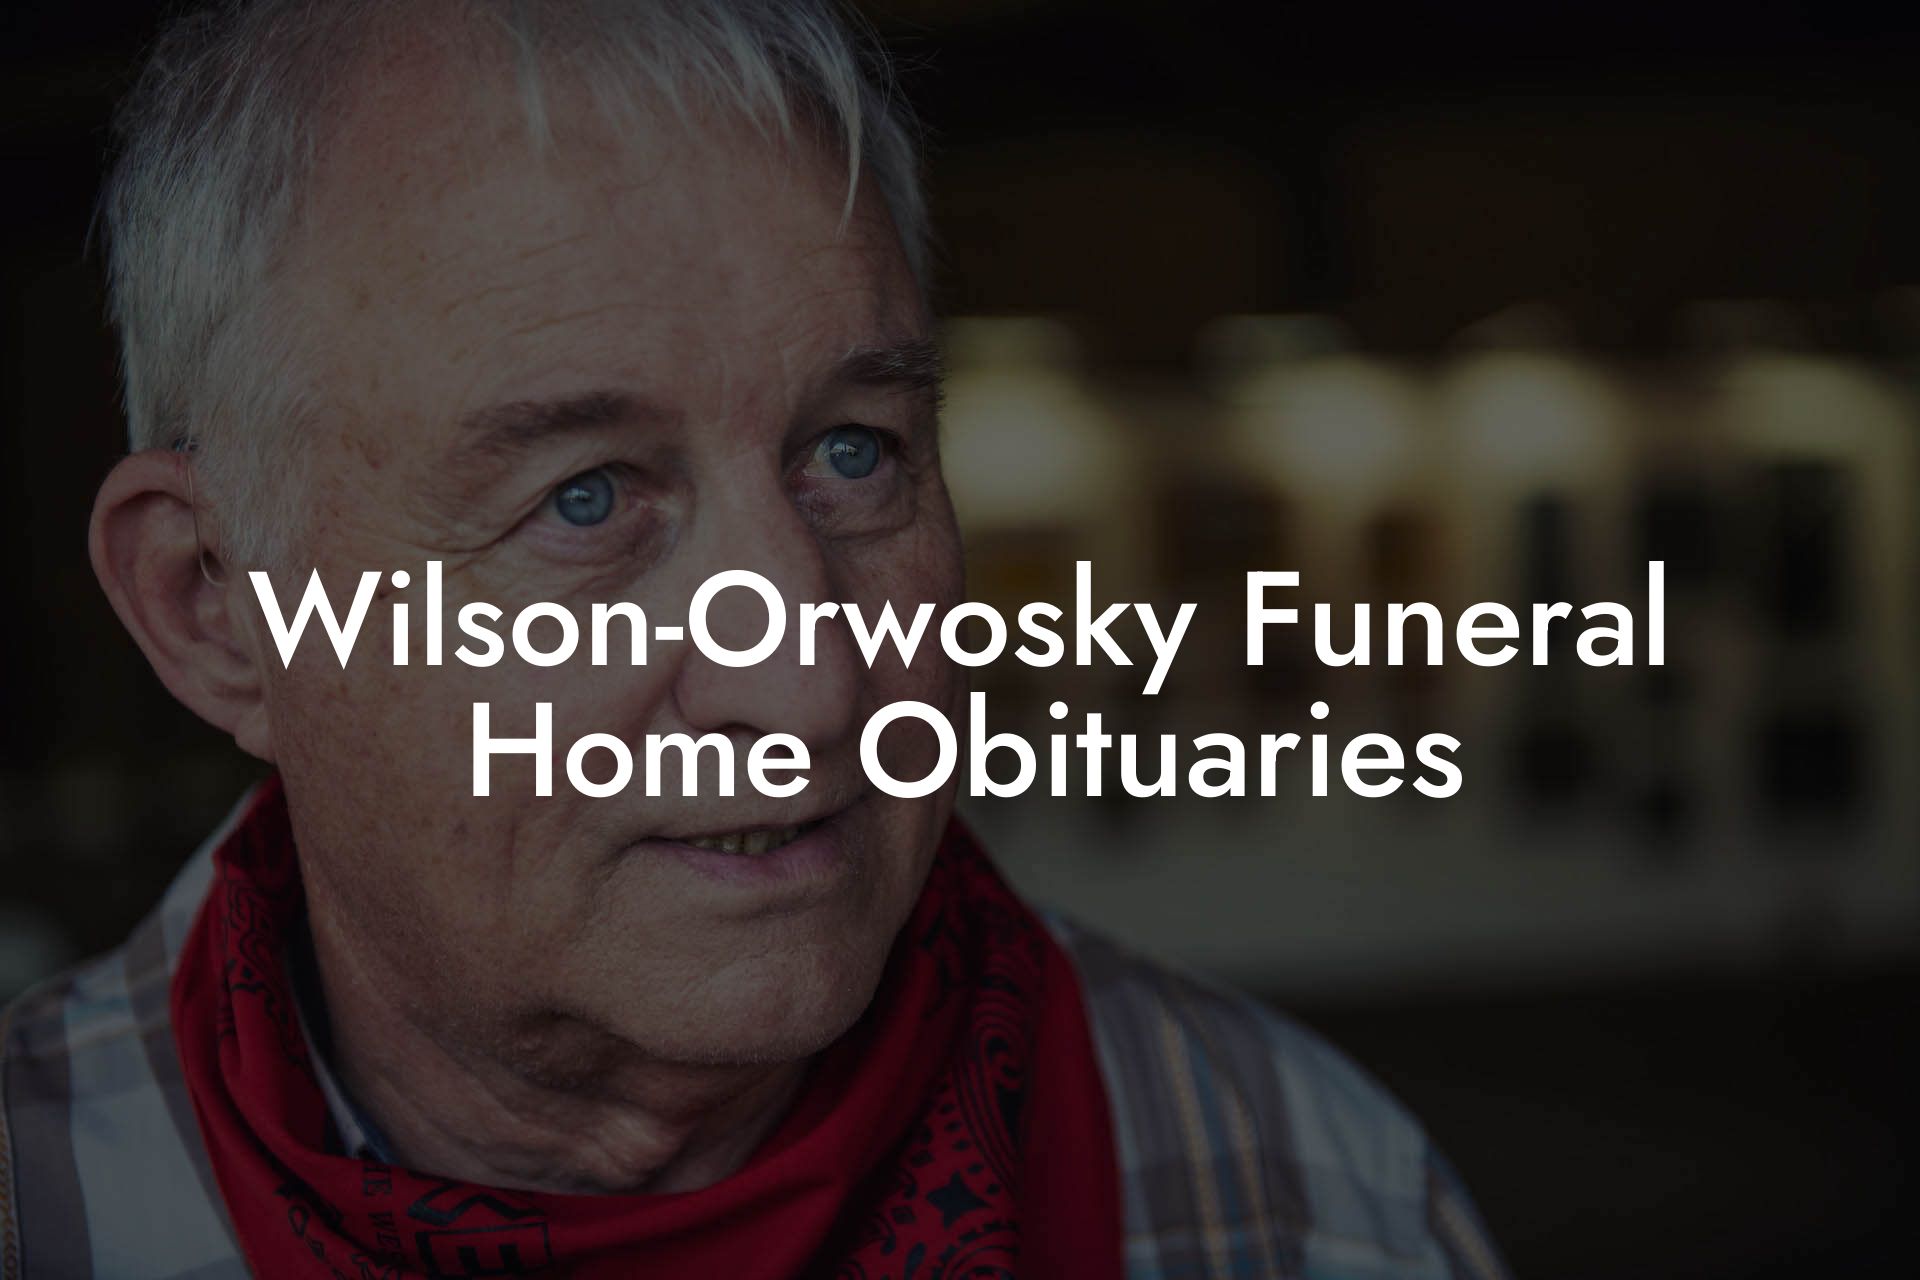 Wilson-Orwosky Funeral Home Obituaries